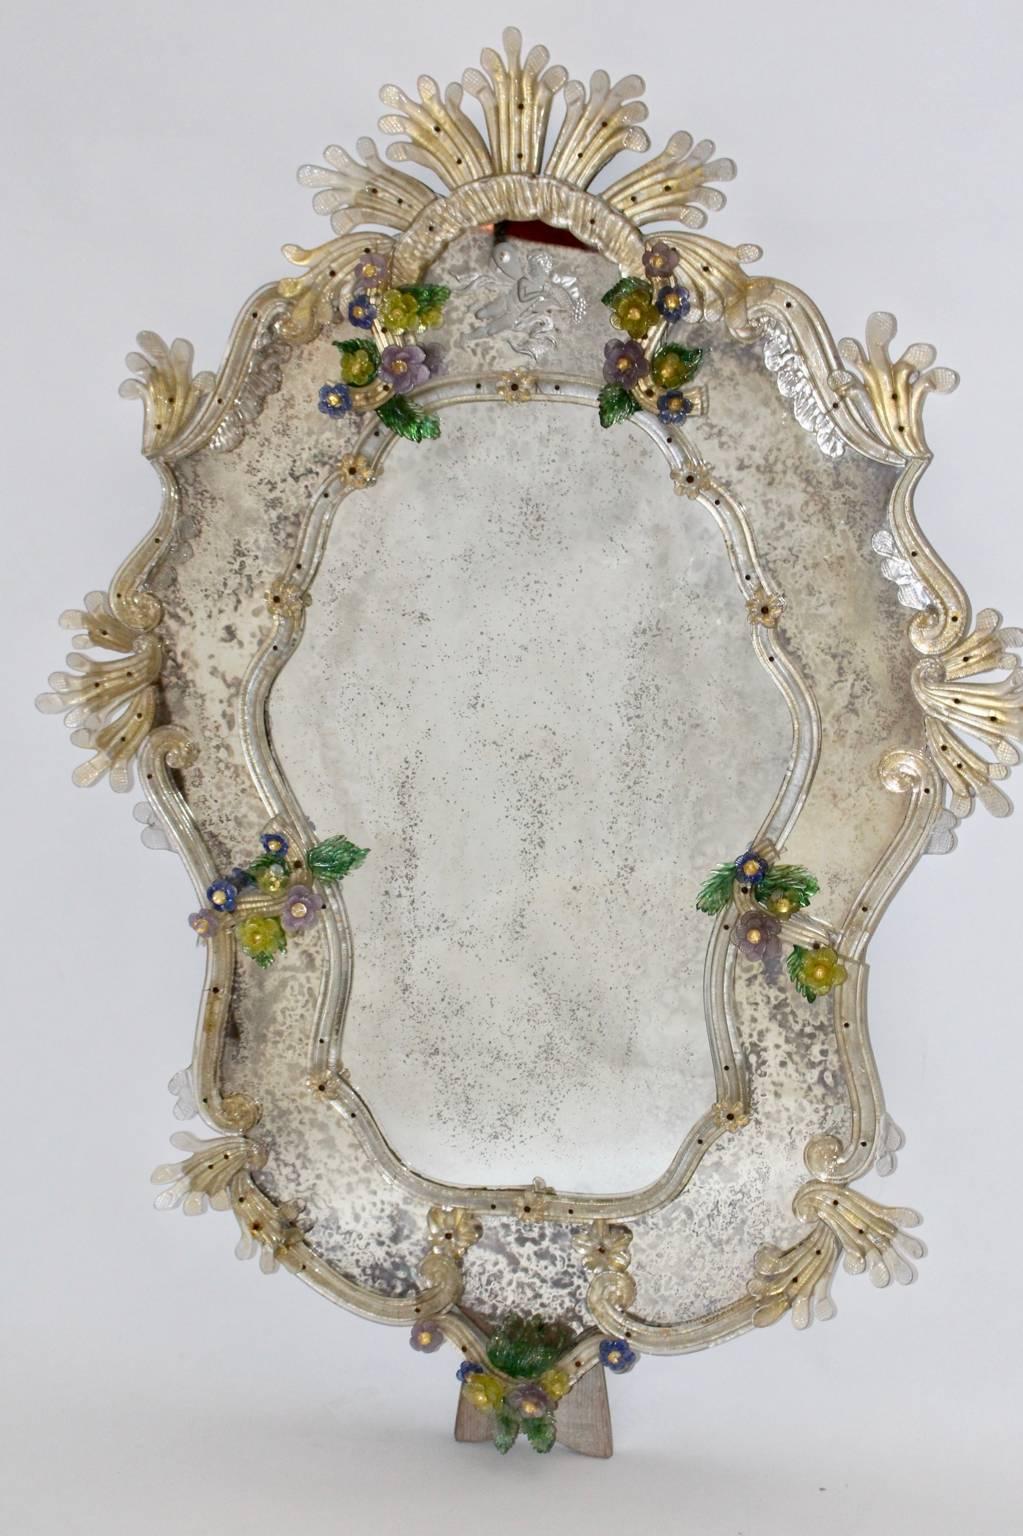 This charming handmade wall mirror was designed and made in Venice in 1950s.
The frame of the mirror is decorated with many multicolored handcrafted Murano glass flowers and elements.
At the upper part of the mirror you see an engraved putto amor